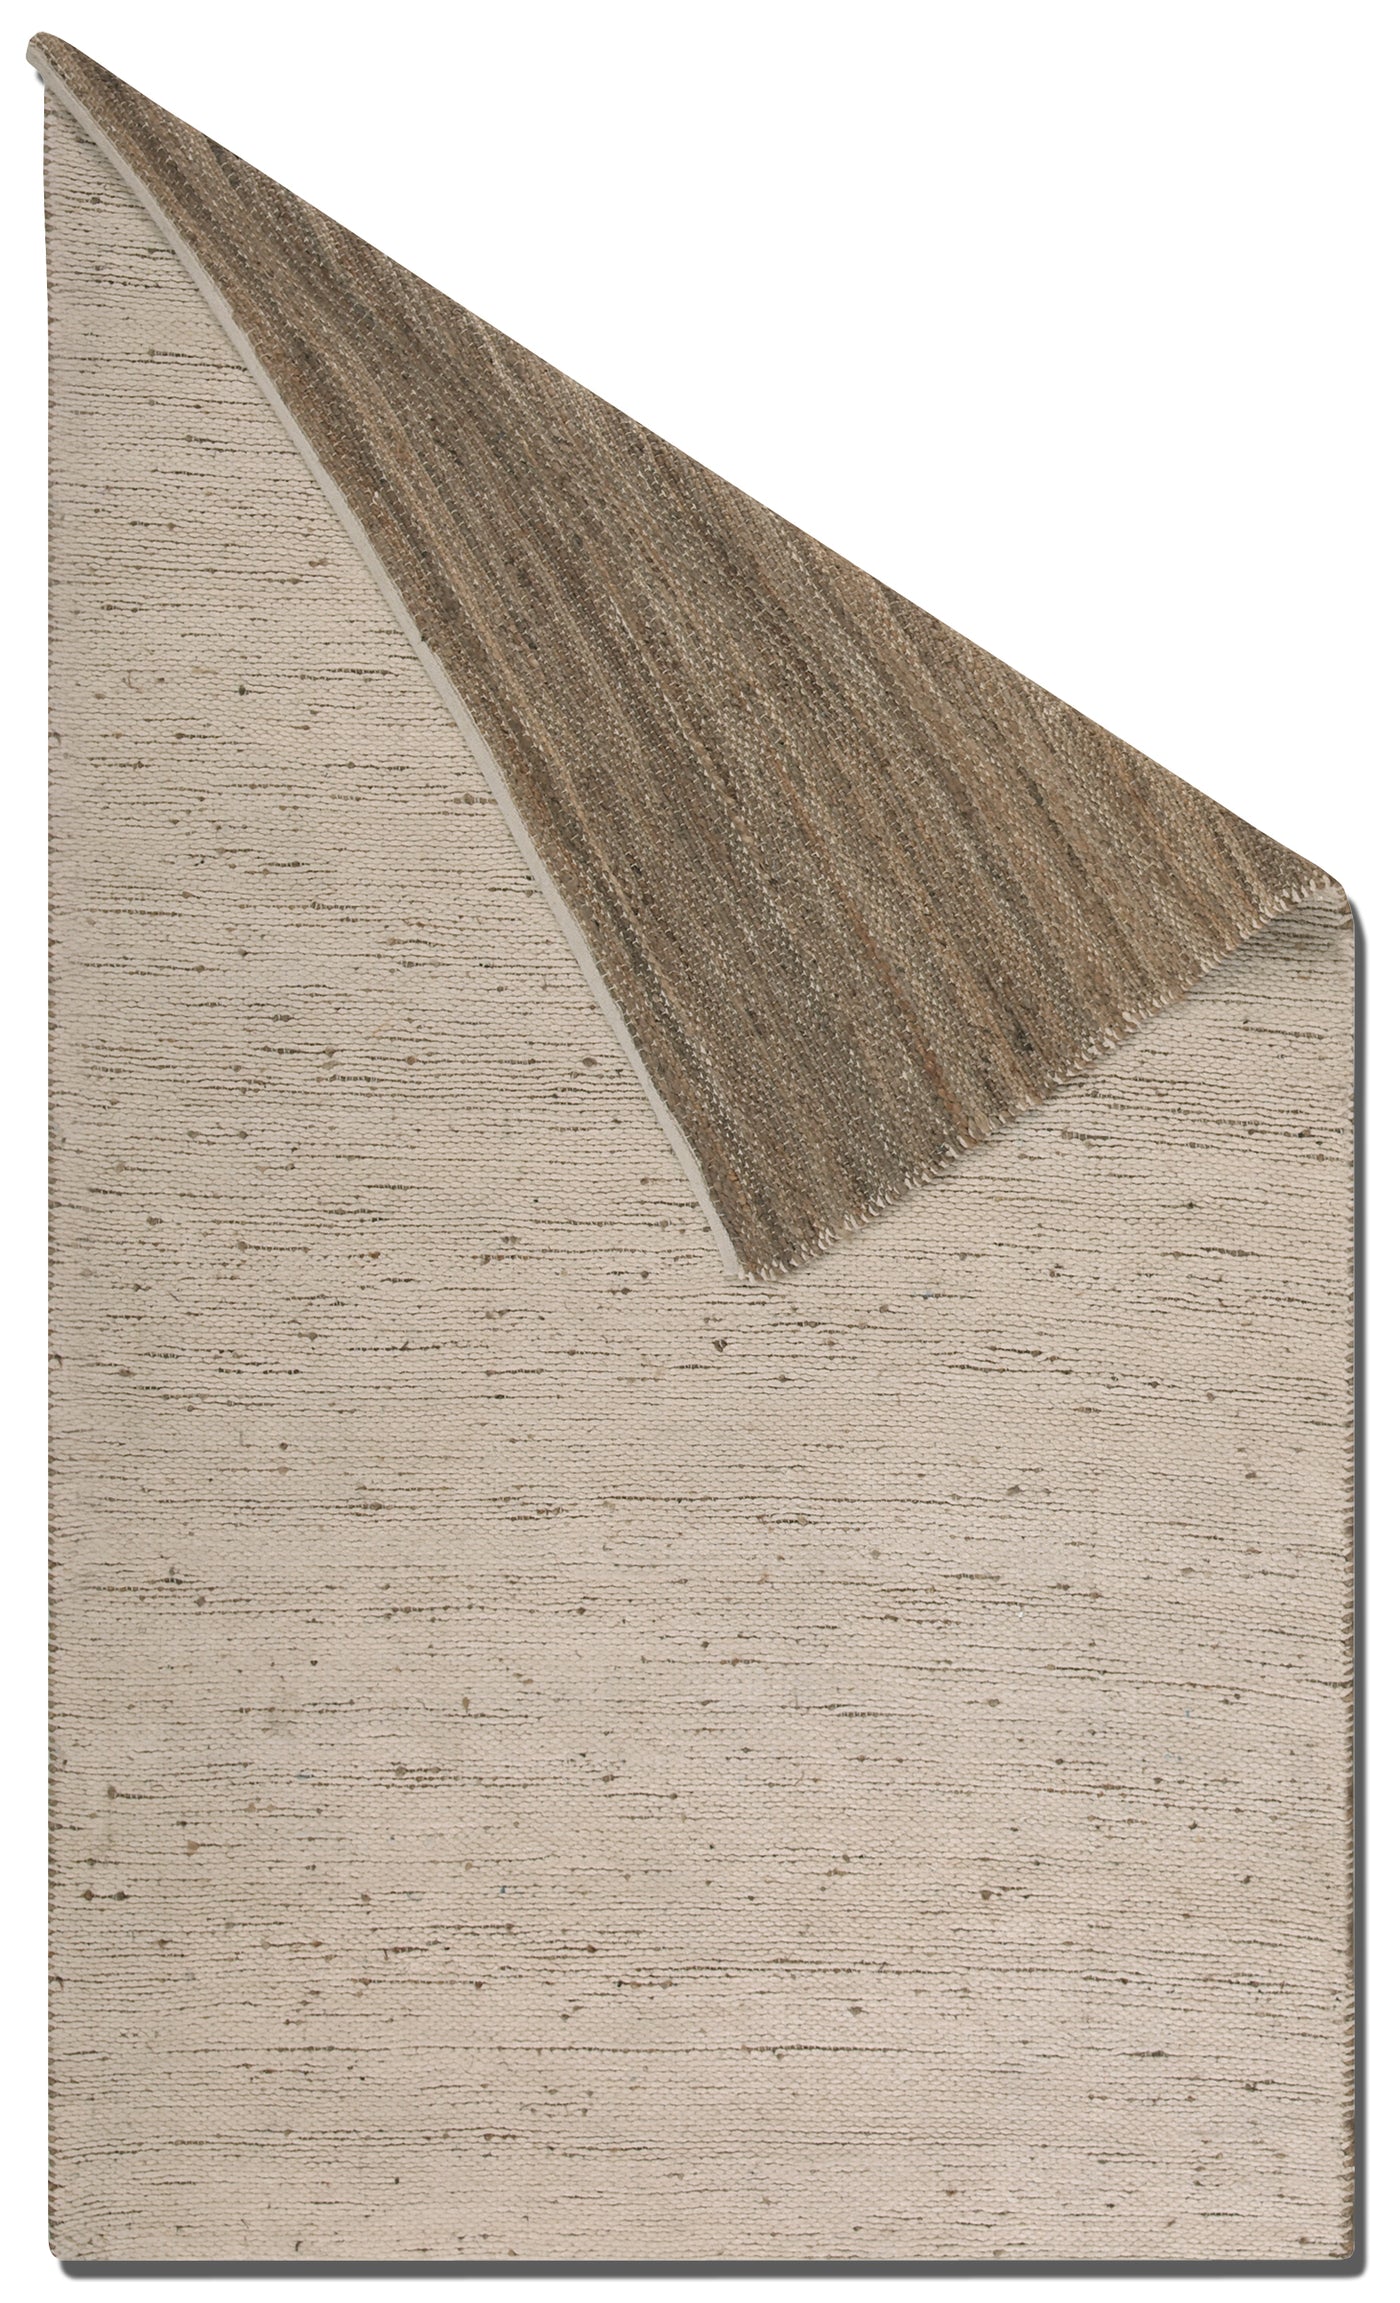 This Reversible Rug Is Hand Woven Natural Hemp And Cotton Chenille. This Rug Is Not Recommended For High Traffic Areas.